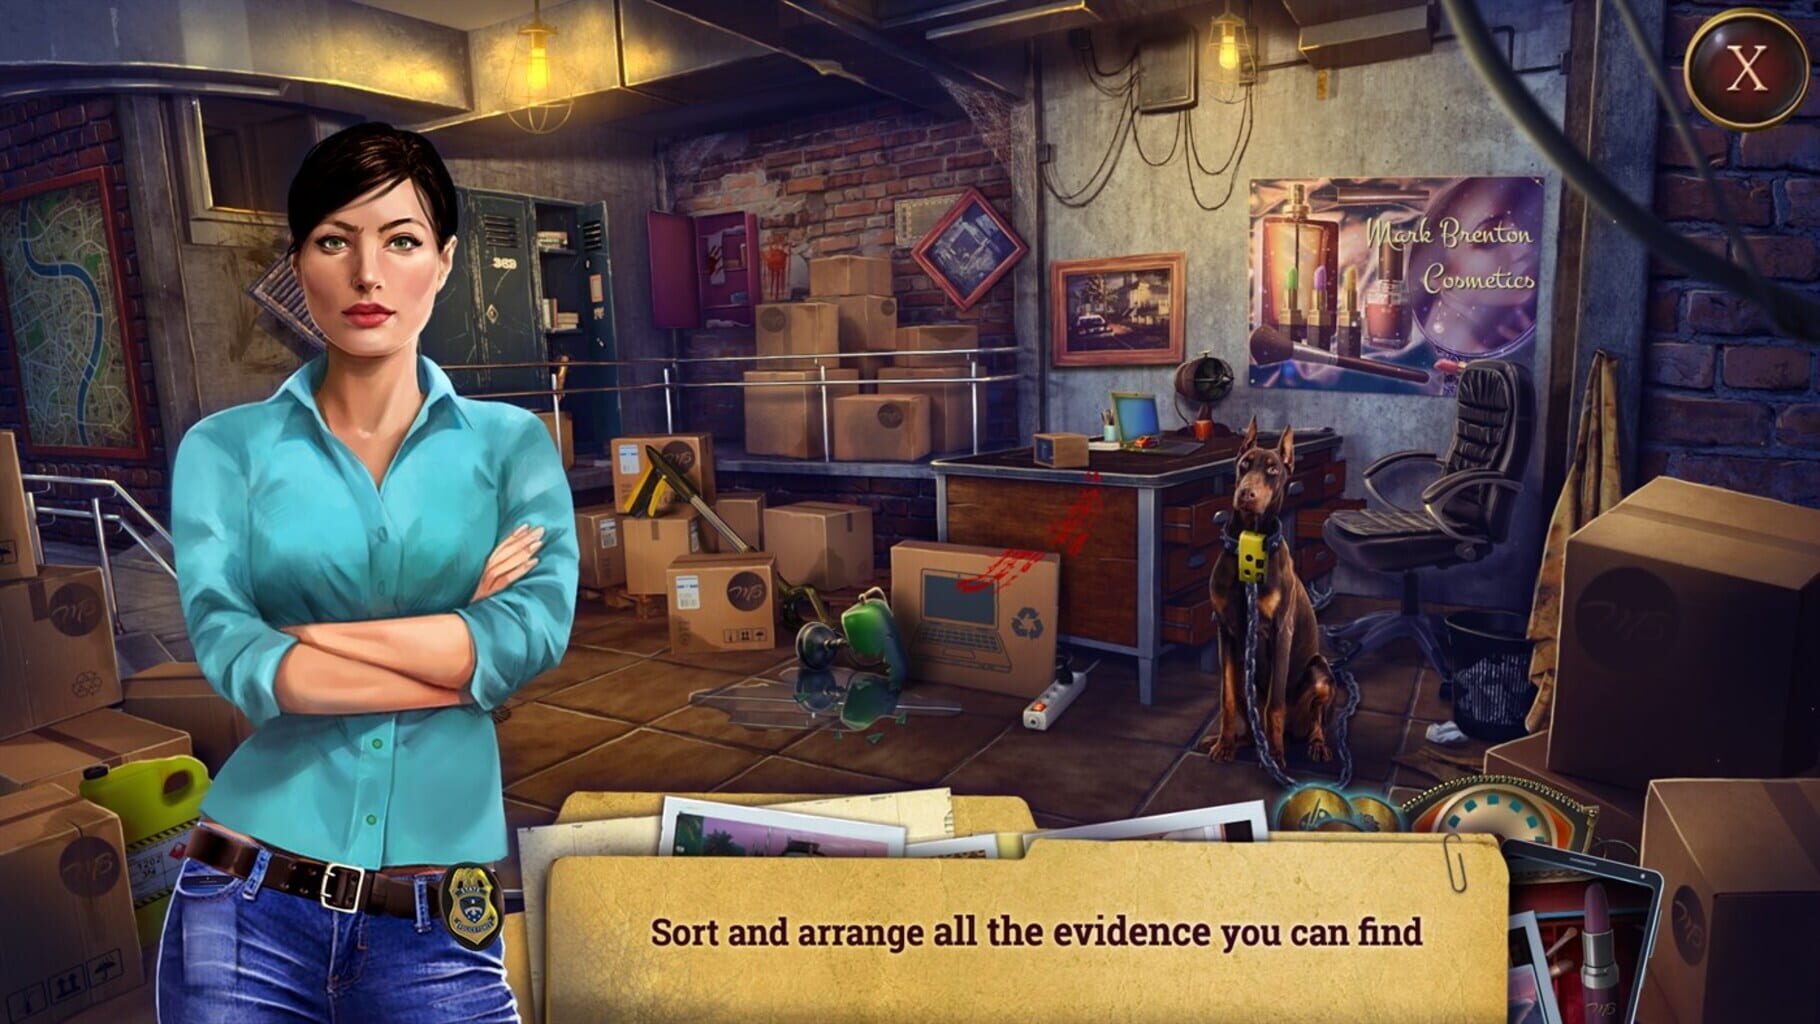 Family Mysteries: Poisonous Promises screenshot